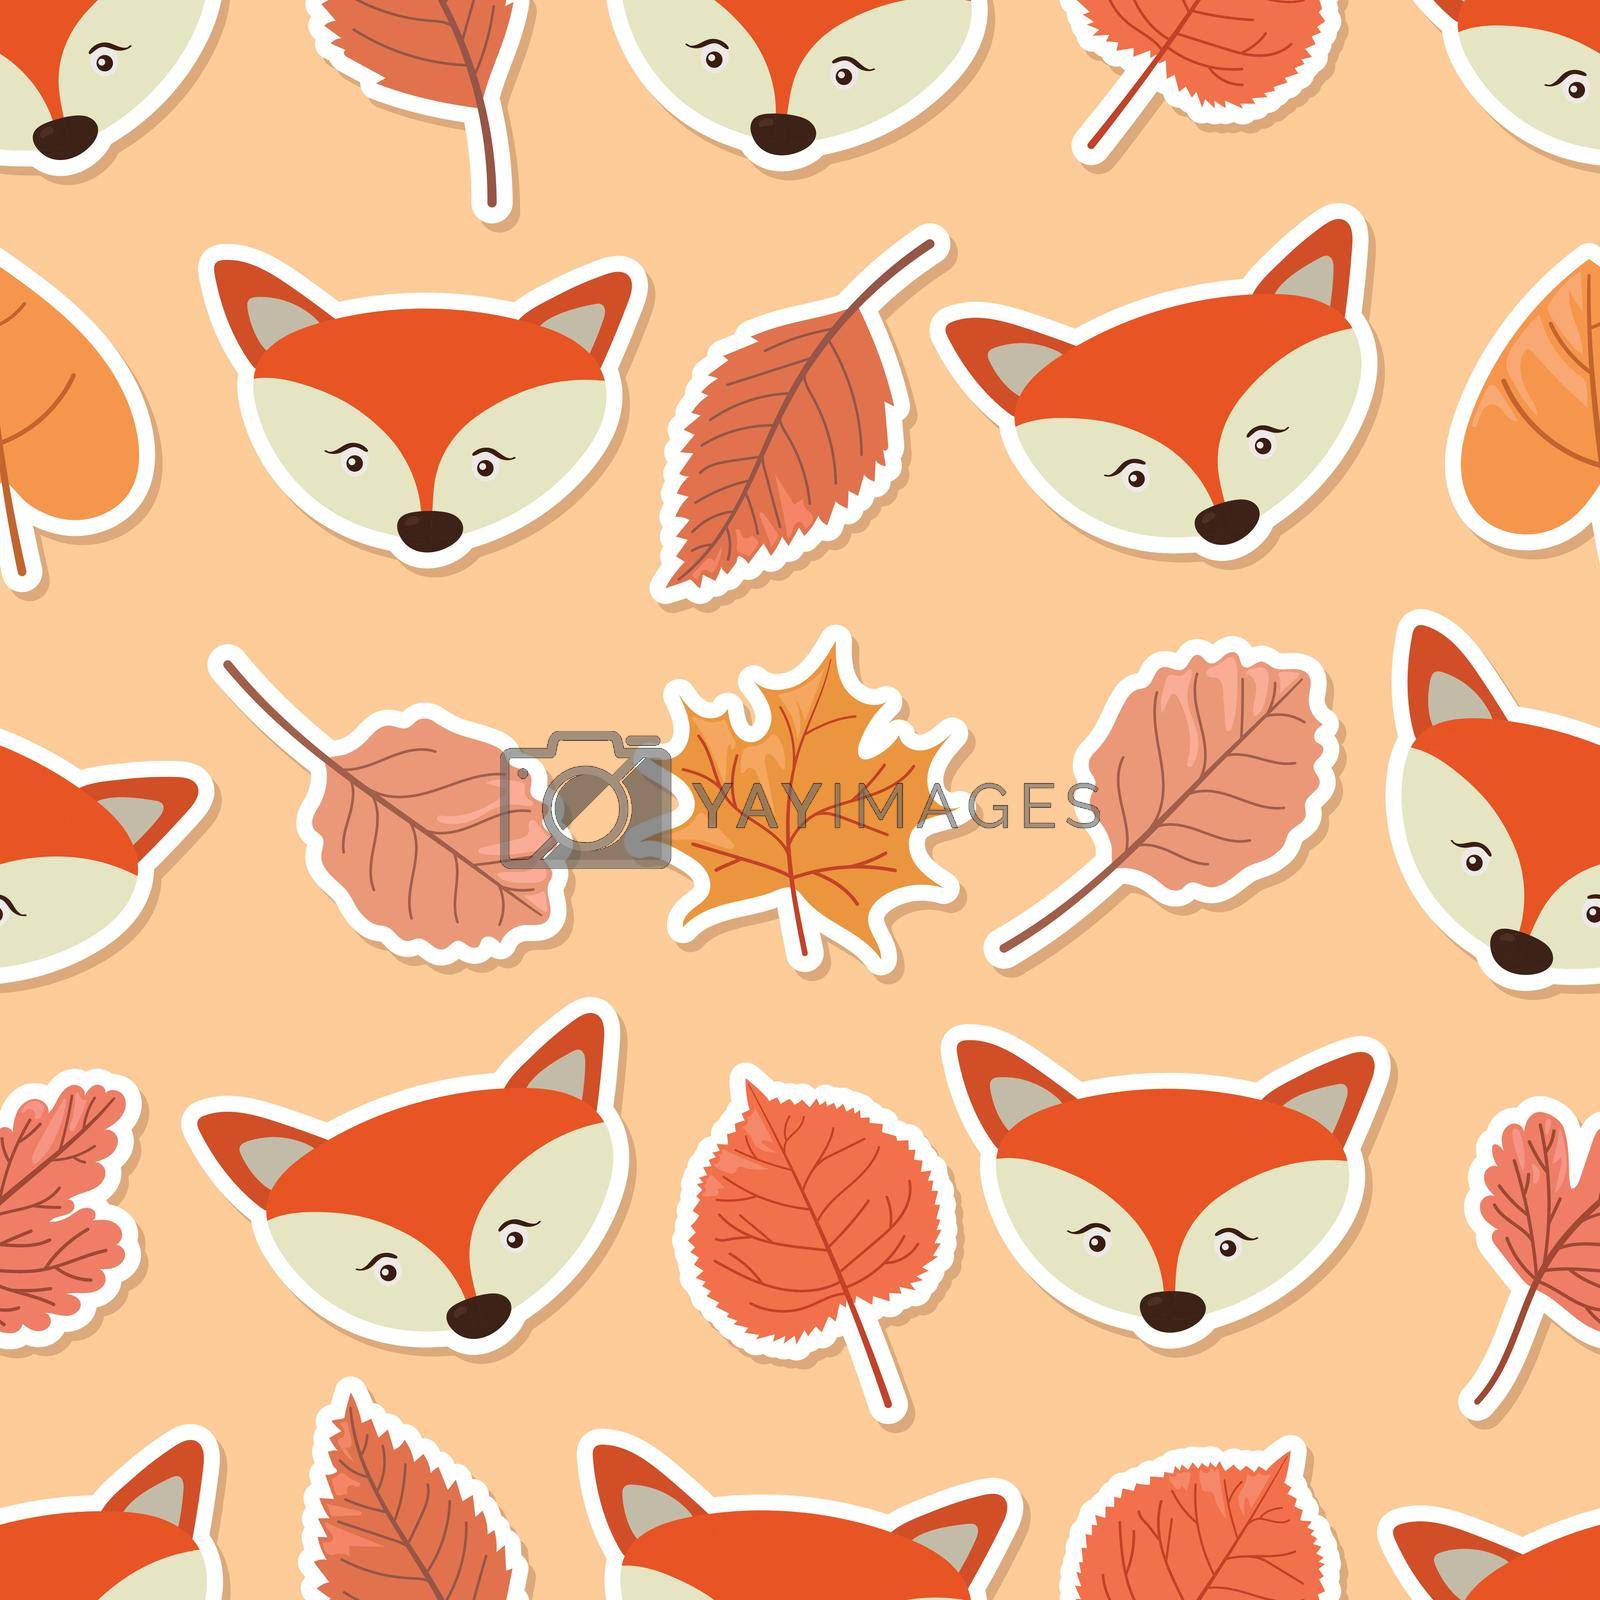 Royalty free image of Seamless doodle fox and leaf sticker cartoon pattern by valueinvestor